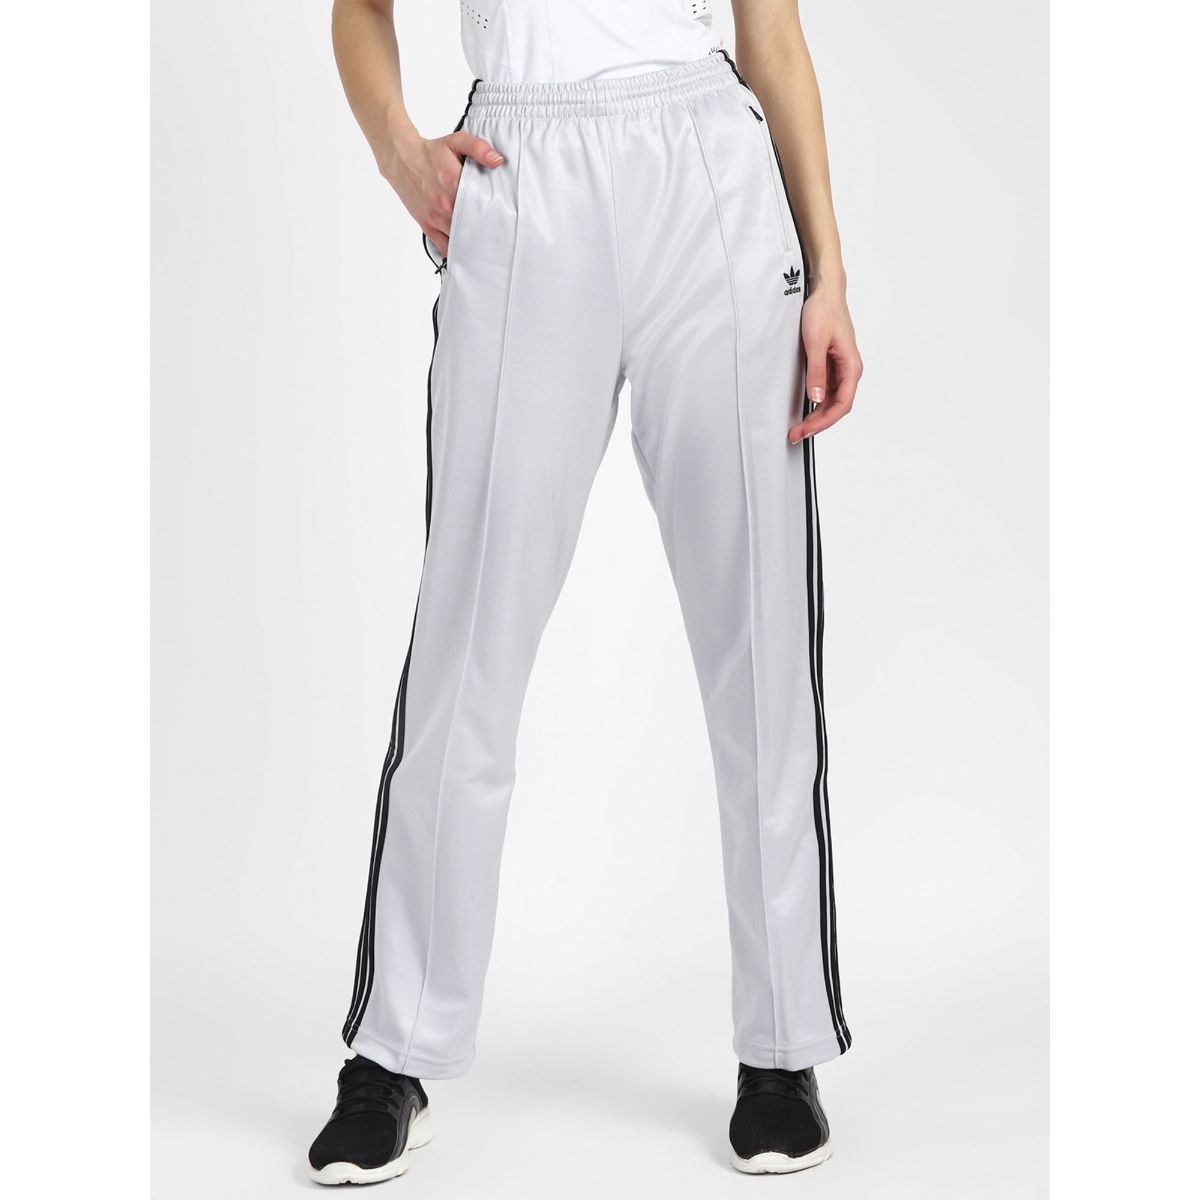 adidas Originals PANTS Silver Casual Track Pant (M/L): Buy adidas Originals  PANTS Silver Casual Track Pant (M/L) Online at Best Price in India | Nykaa